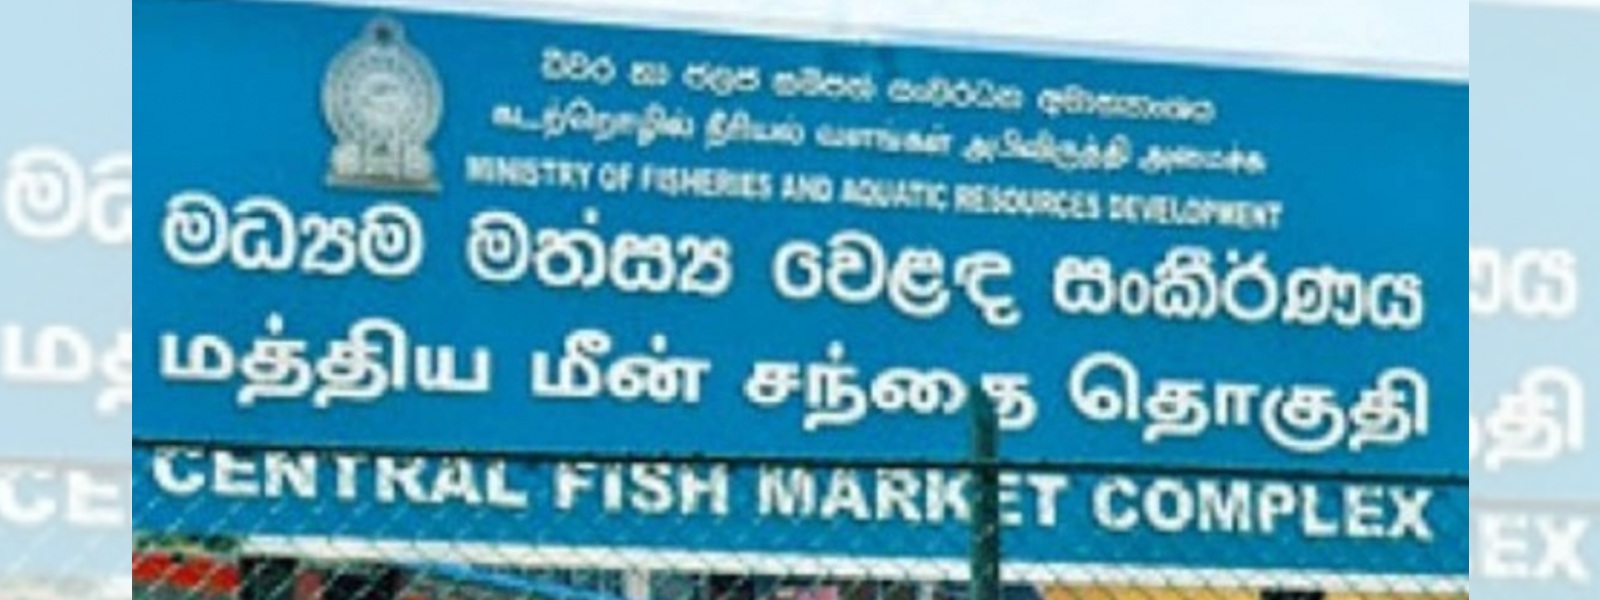 Operations at Peliyagoda Fish Market to resume once Health Ministry gives the go-ahead